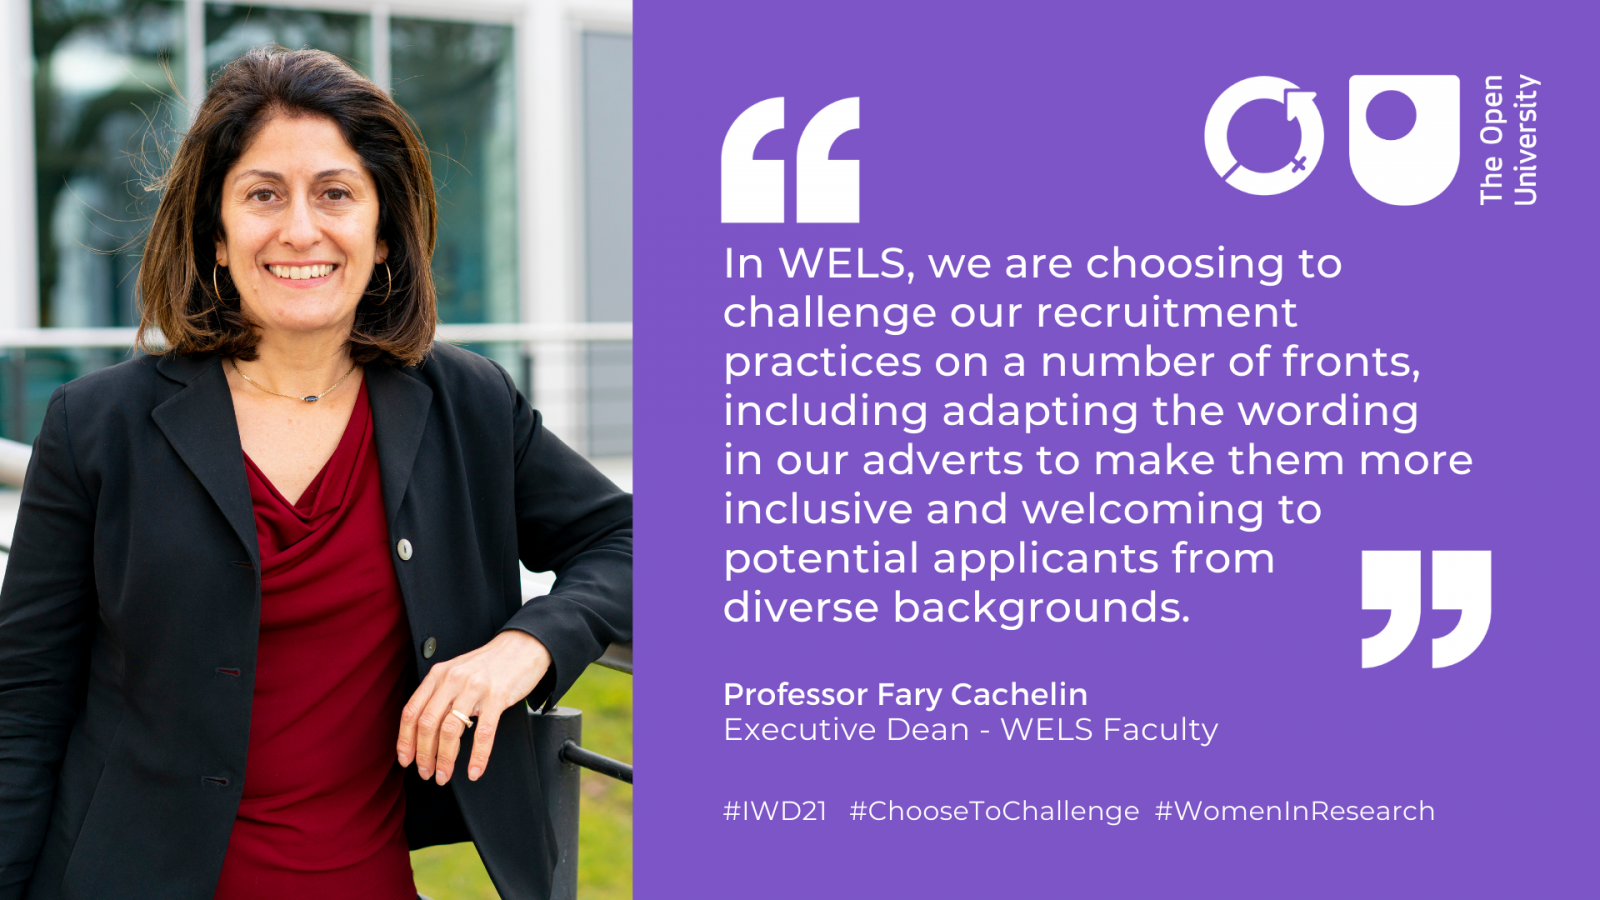  In WELS, we are choosing to challenge our recruitment practices on a number of fronts, including adapting the wording in our adverts to make them more inclusive and welcoming to potential applicants from diverse backgrounds. Professor Fary Cachelin, Executive Dean - WELS Faculty.